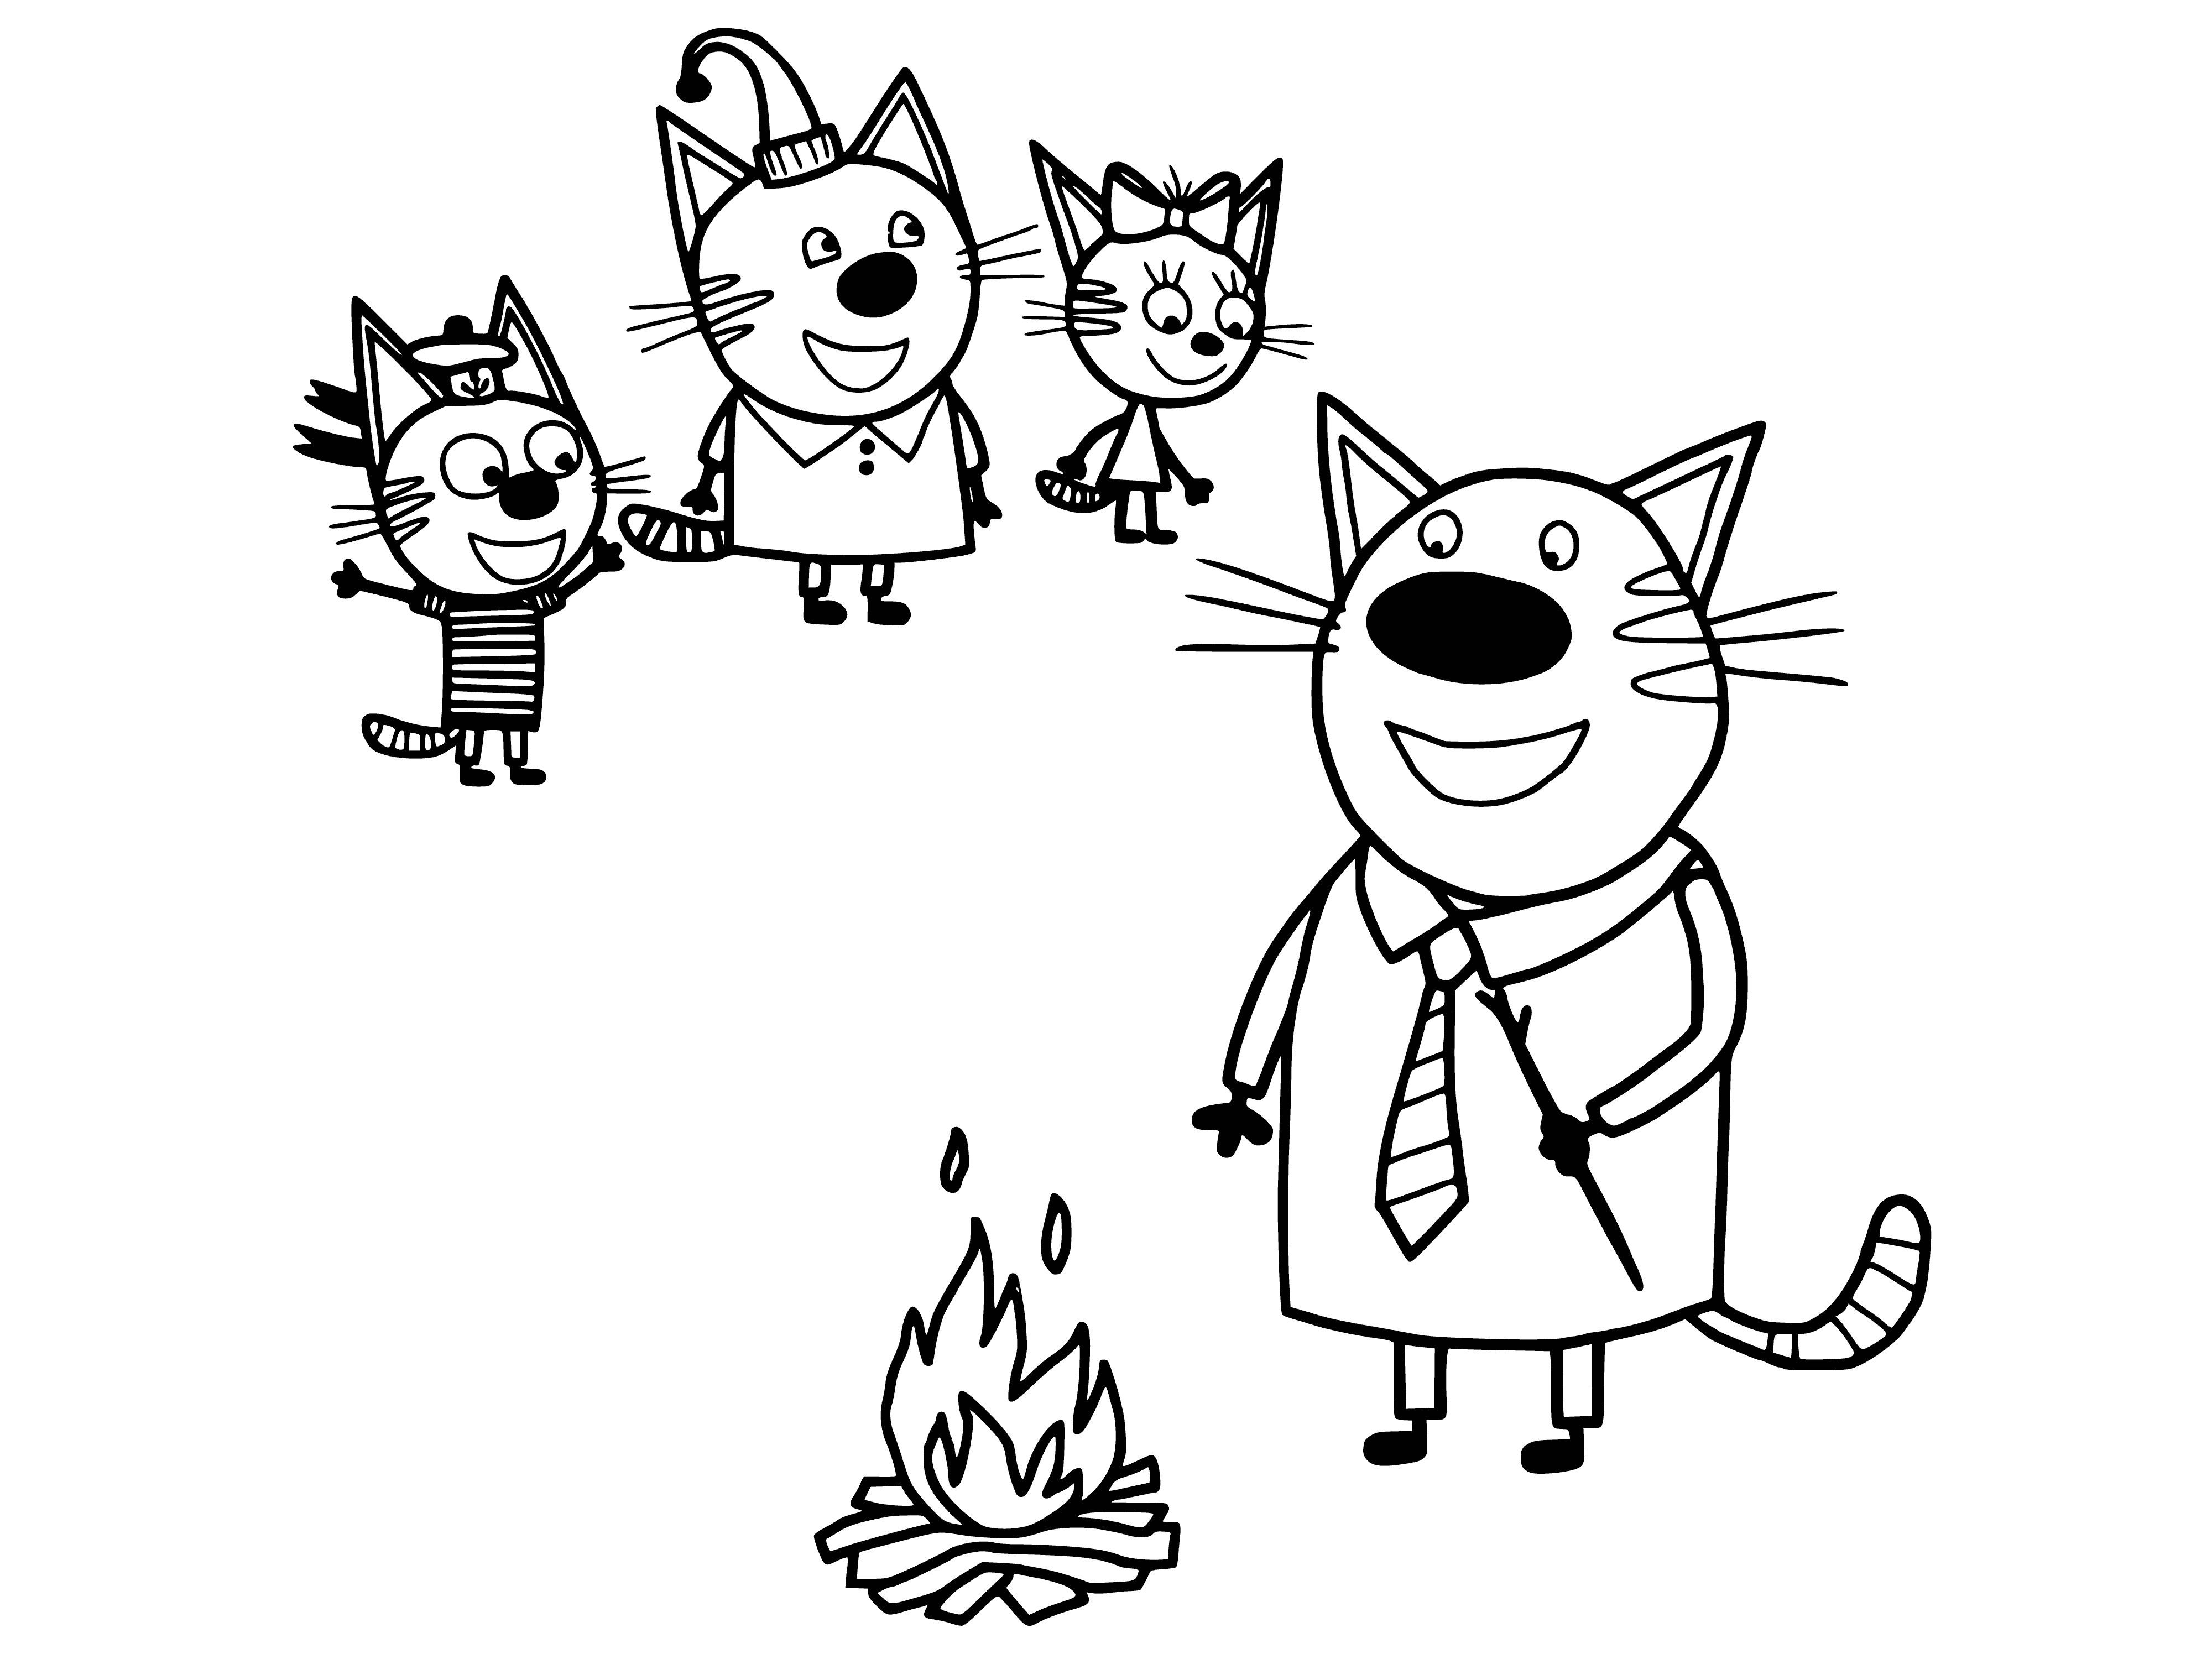 coloring page: Three cats: one lighting fire, two sitting together. #CatsColoringPage